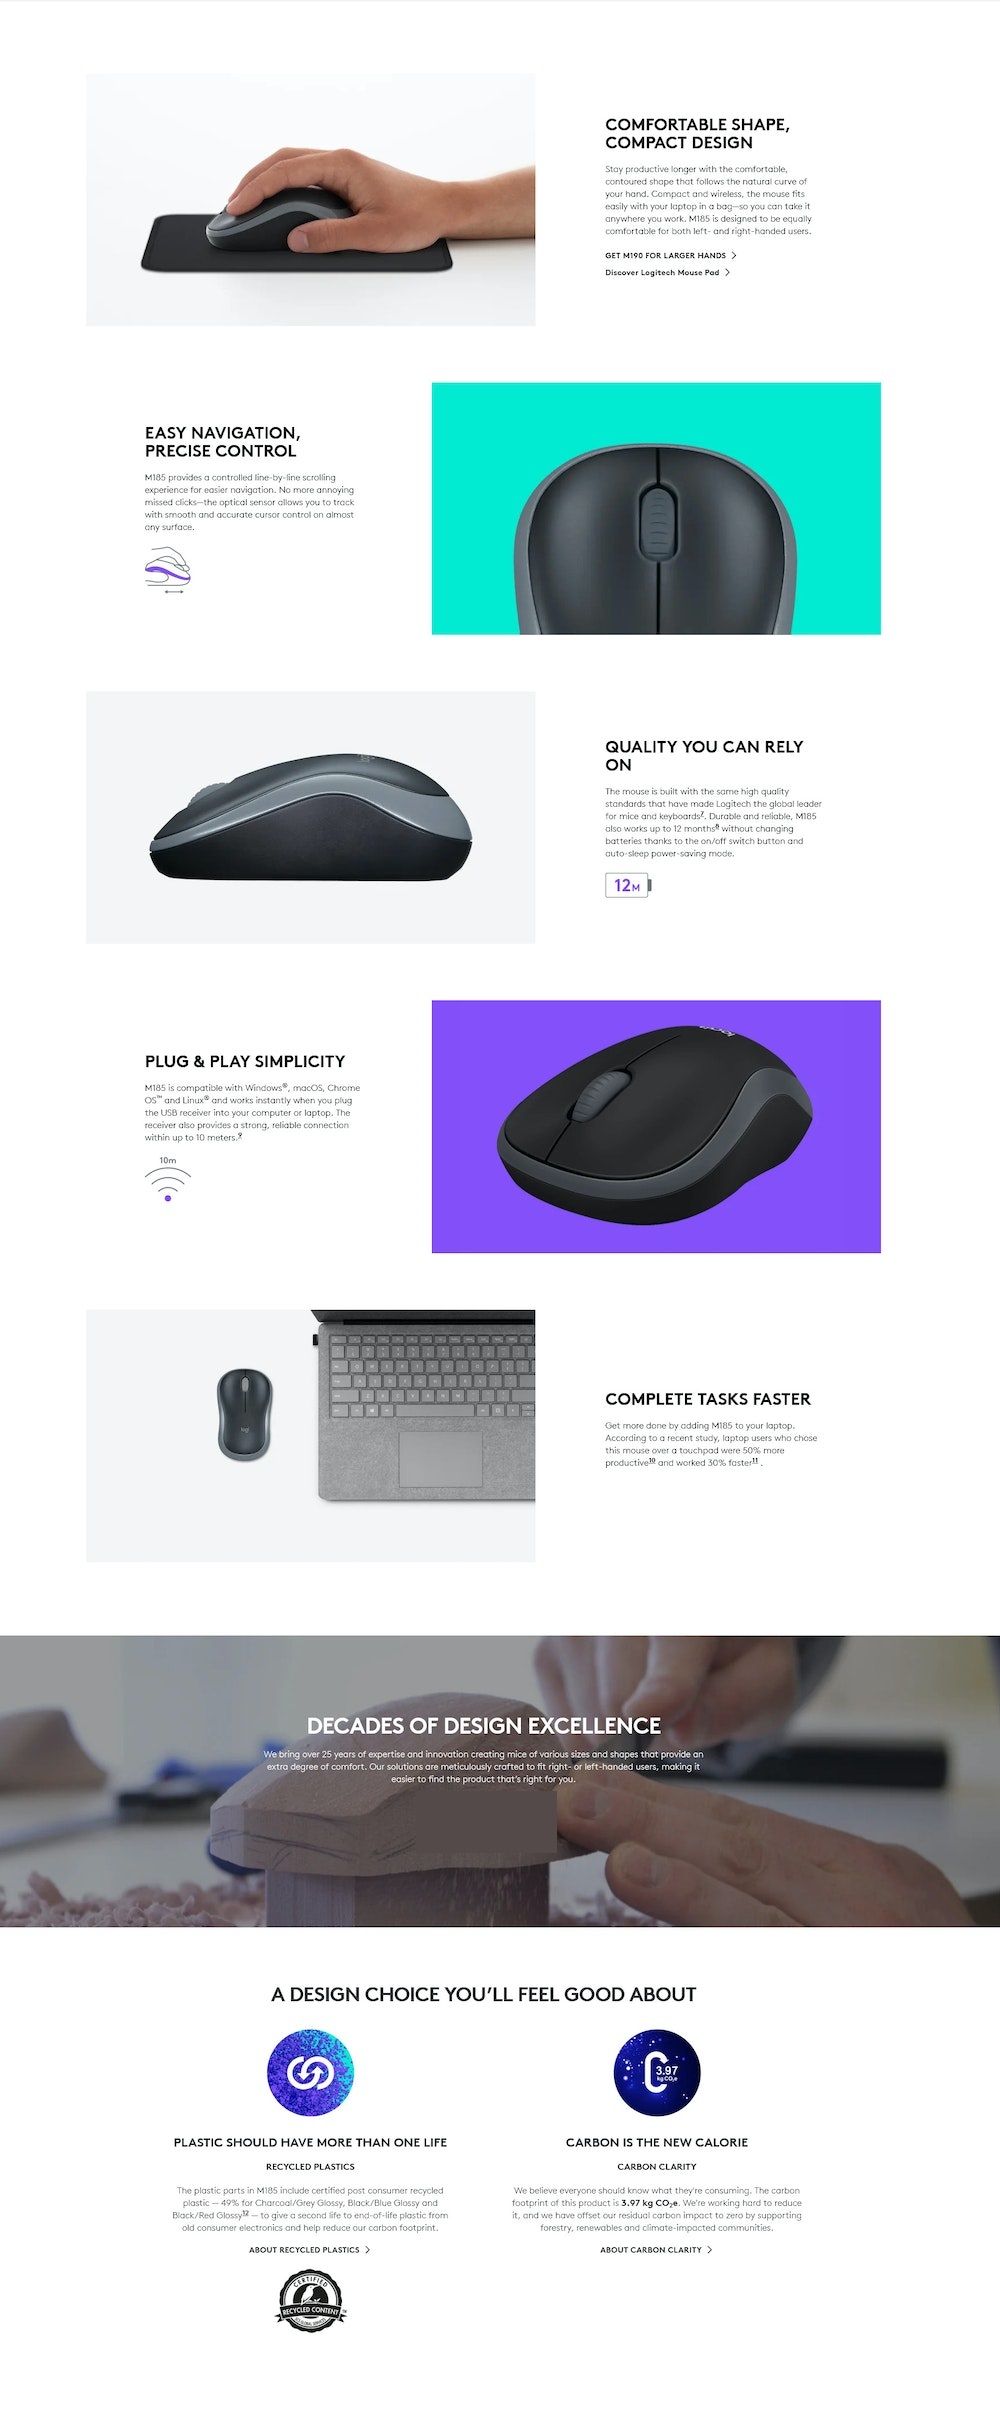 A large marketing image providing additional information about the product Logitech M185 Compact Wireless Mouse - Blue - Additional alt info not provided